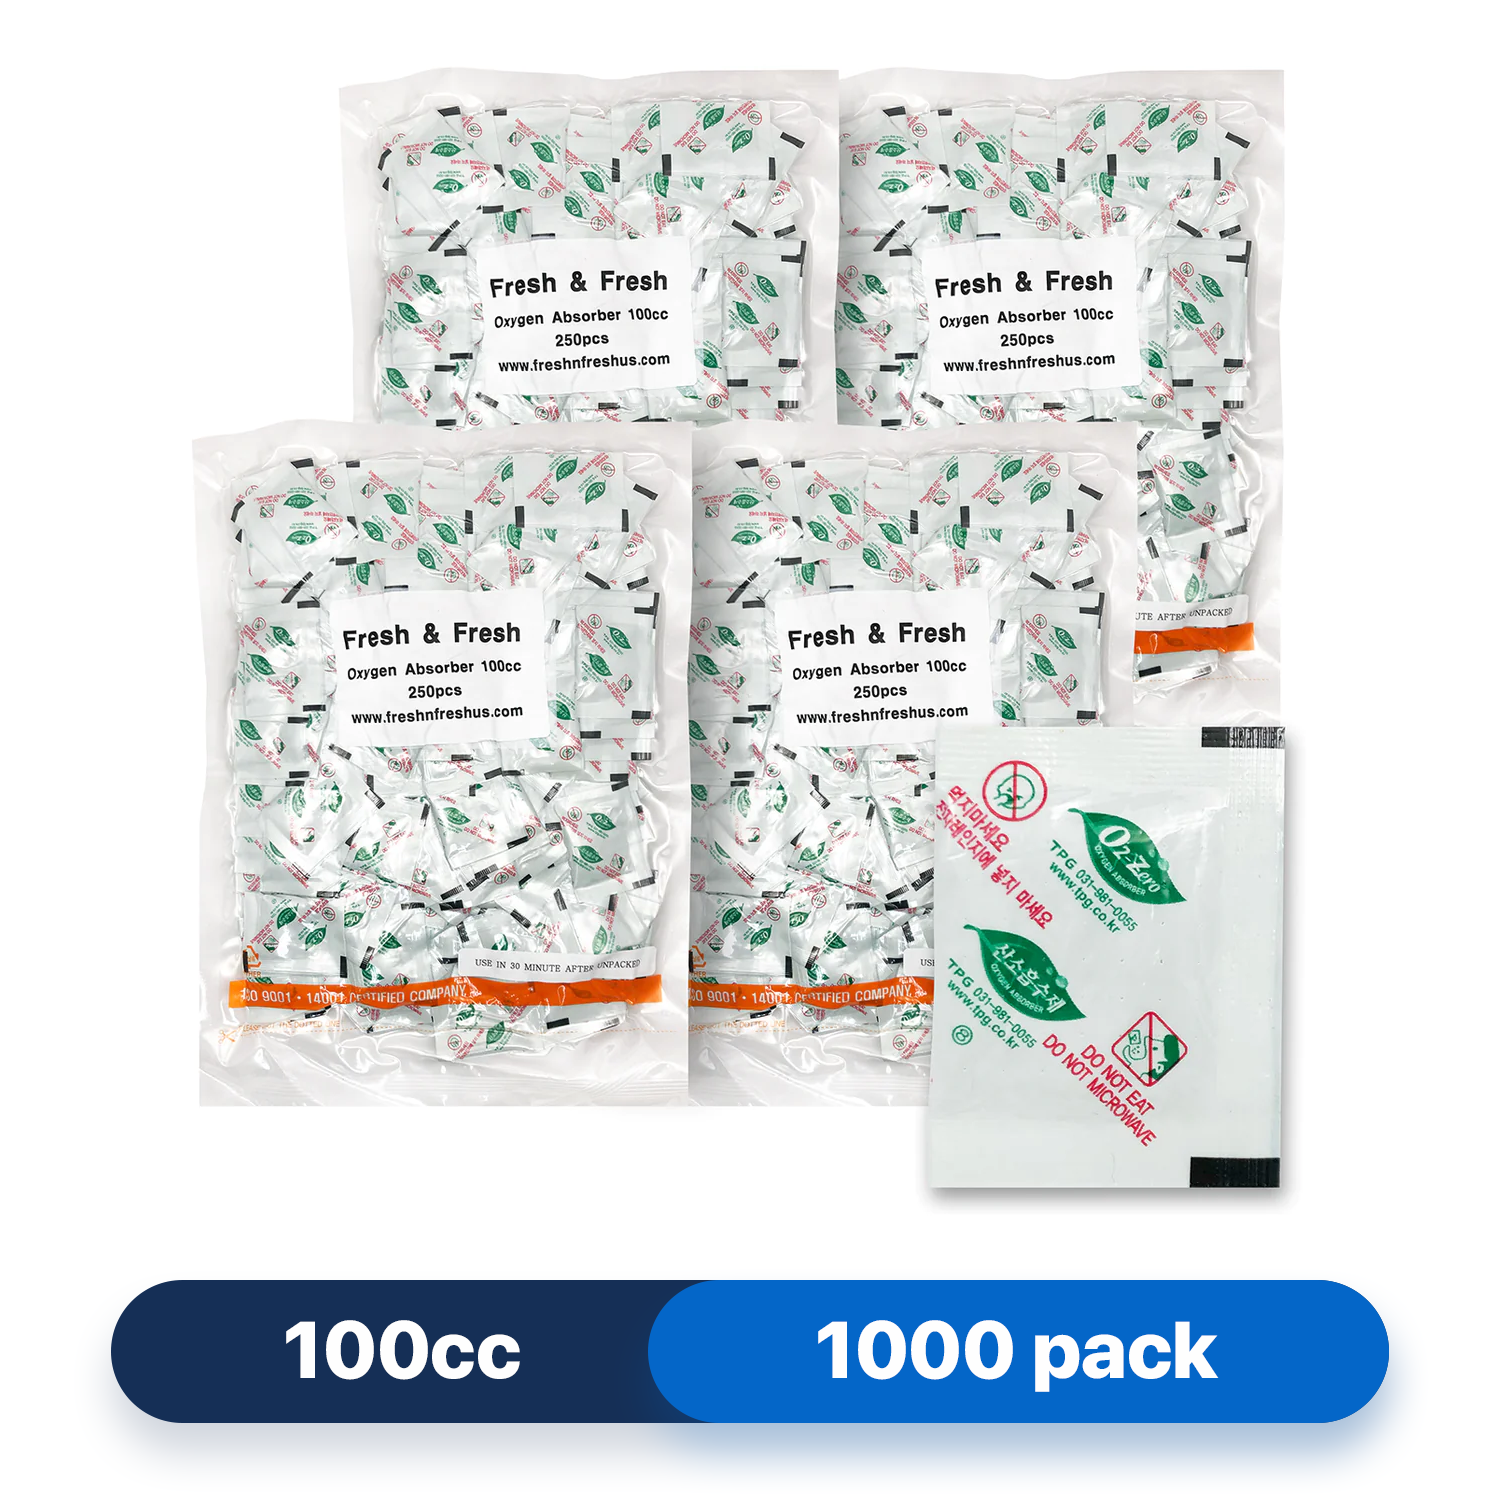 Fresh & Fresh (1000 Packs) 100 CC Premium Oxygen Absorbers(4 Bag of 250 Packets) - ISO 9001 Certified Facility Manufactured